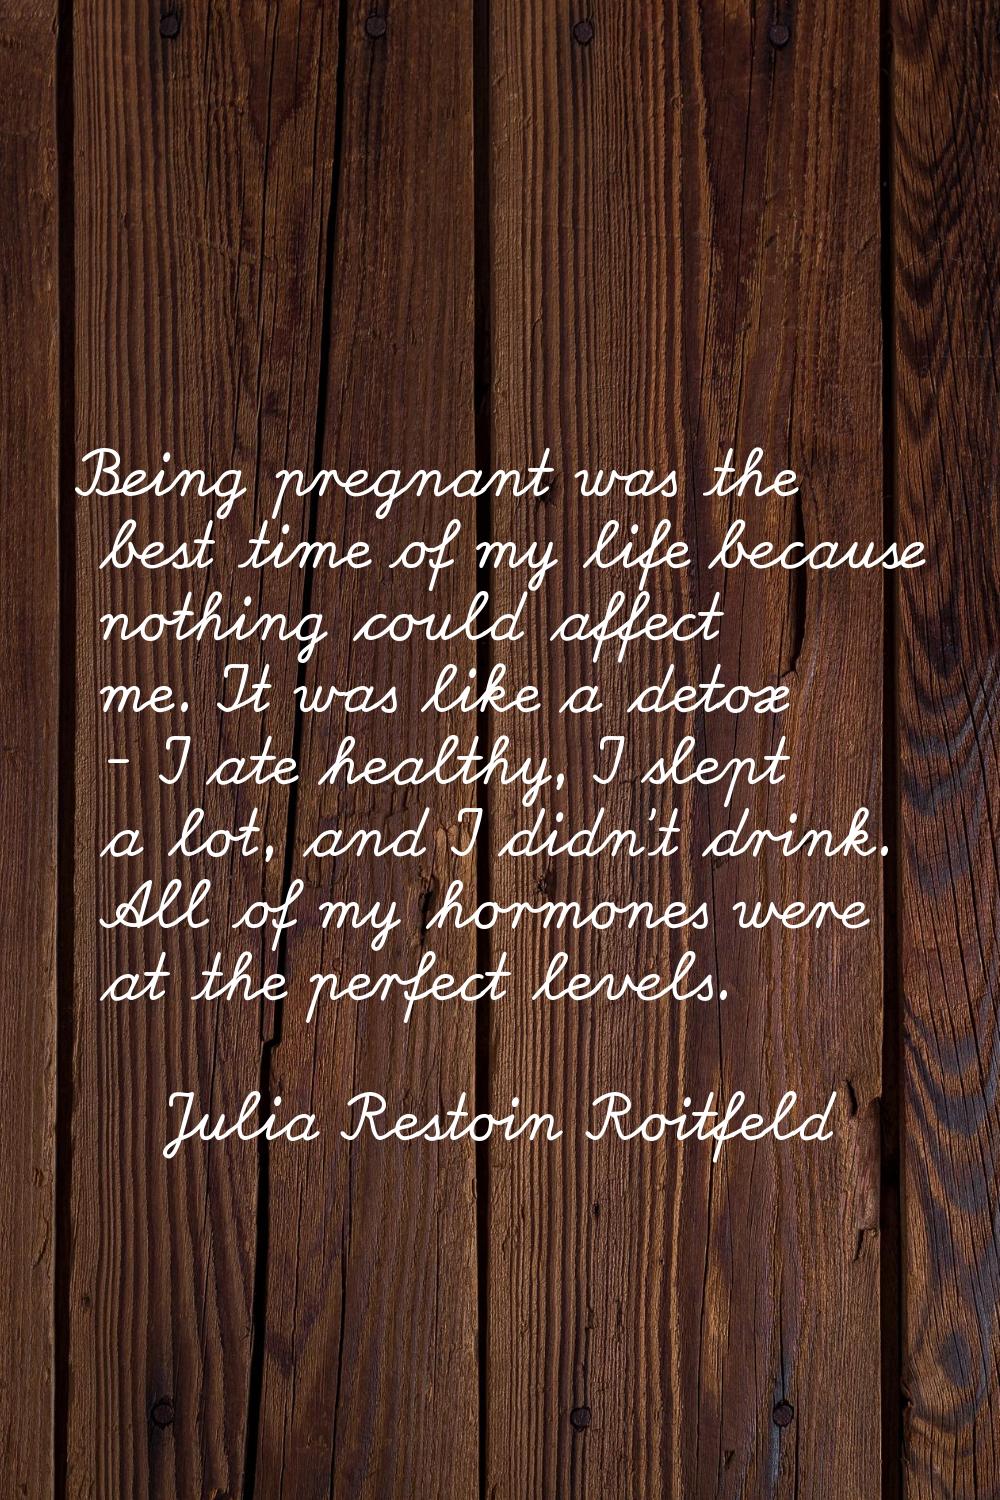 Being pregnant was the best time of my life because nothing could affect me. It was like a detox - 